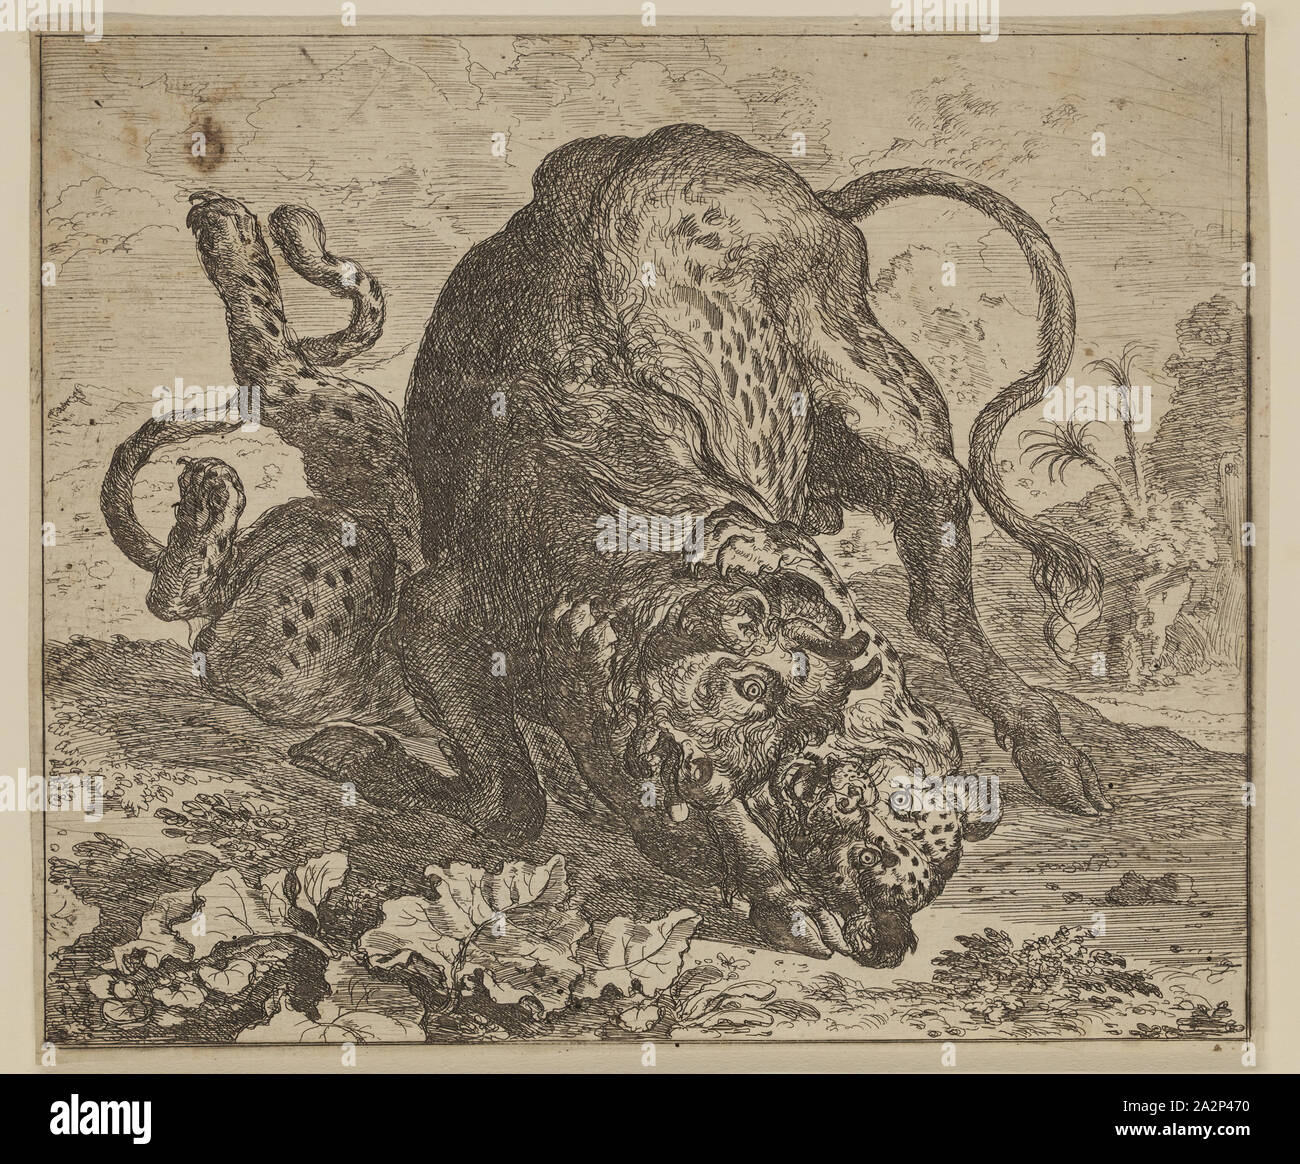 Abraham Hondius, Dutch, 1625-1695, The Urus and the Leopard, ca. 1672, etching printed in black ink on laid paper, Sheet (trimmed within plate mark): 5 5/8 × 6 5/8 inches (14.3 × 16.8 cm Stock Photo